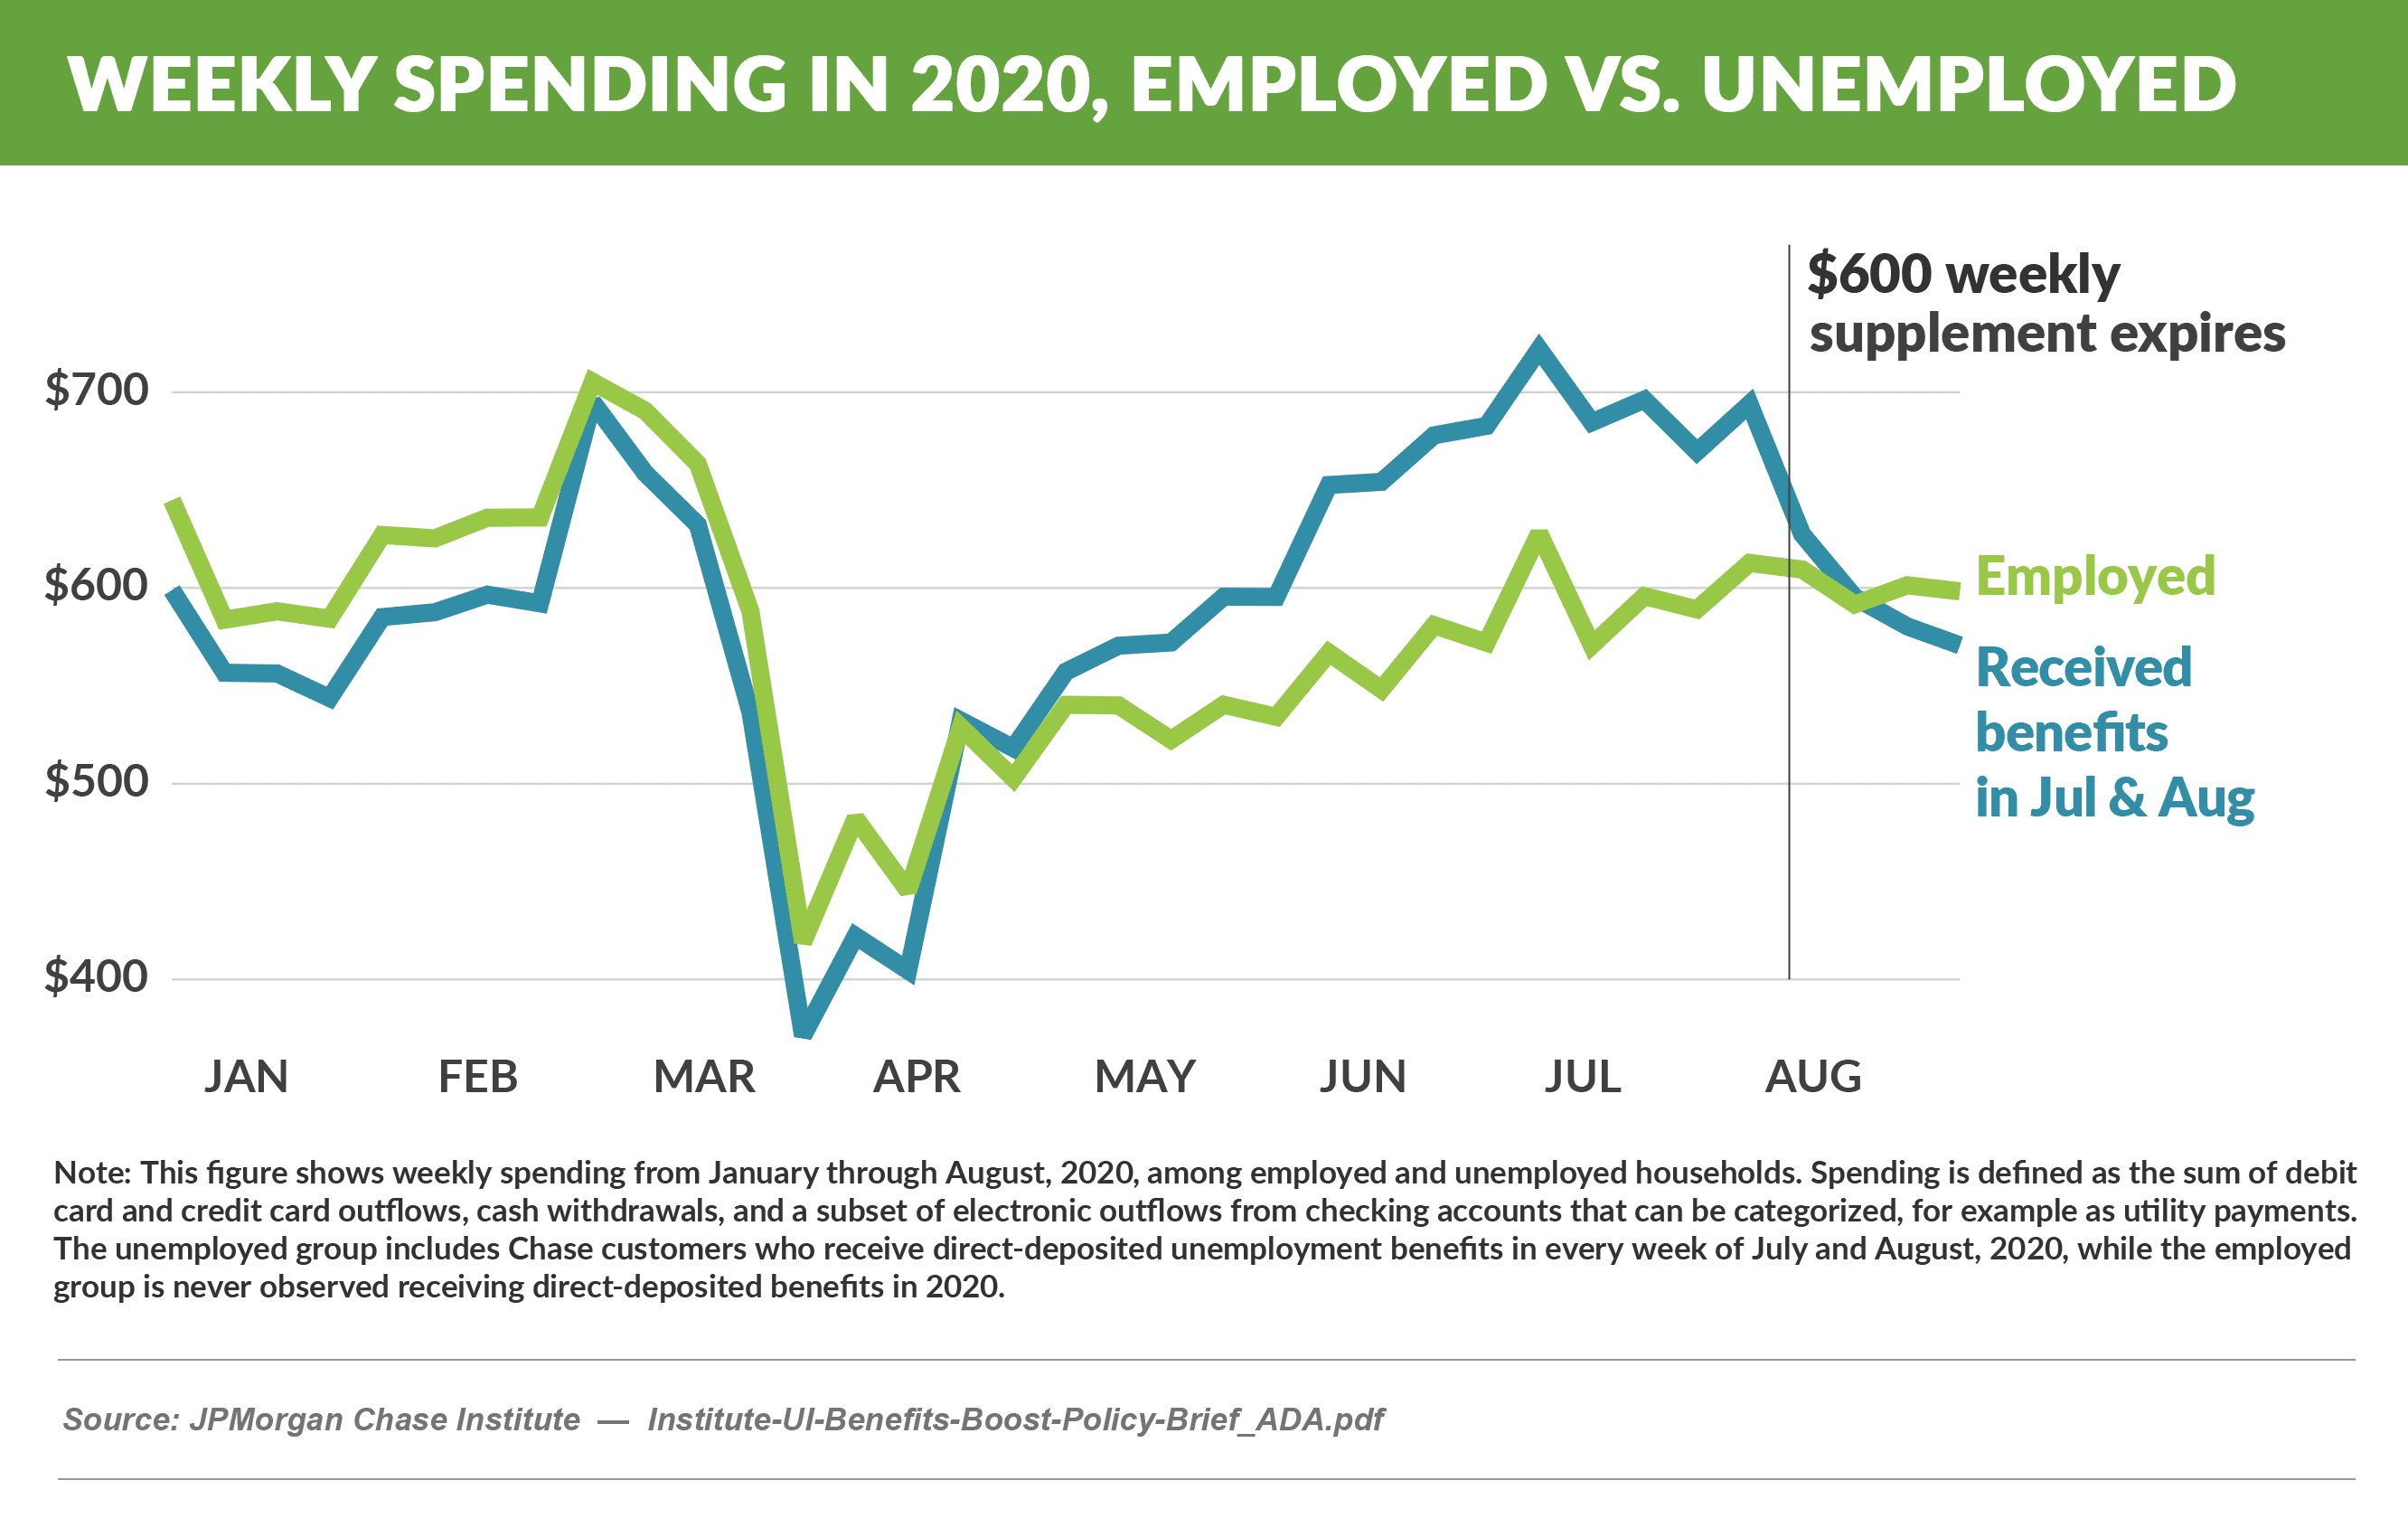 Weekly Spending in 2020, Employed vs. Unemployed